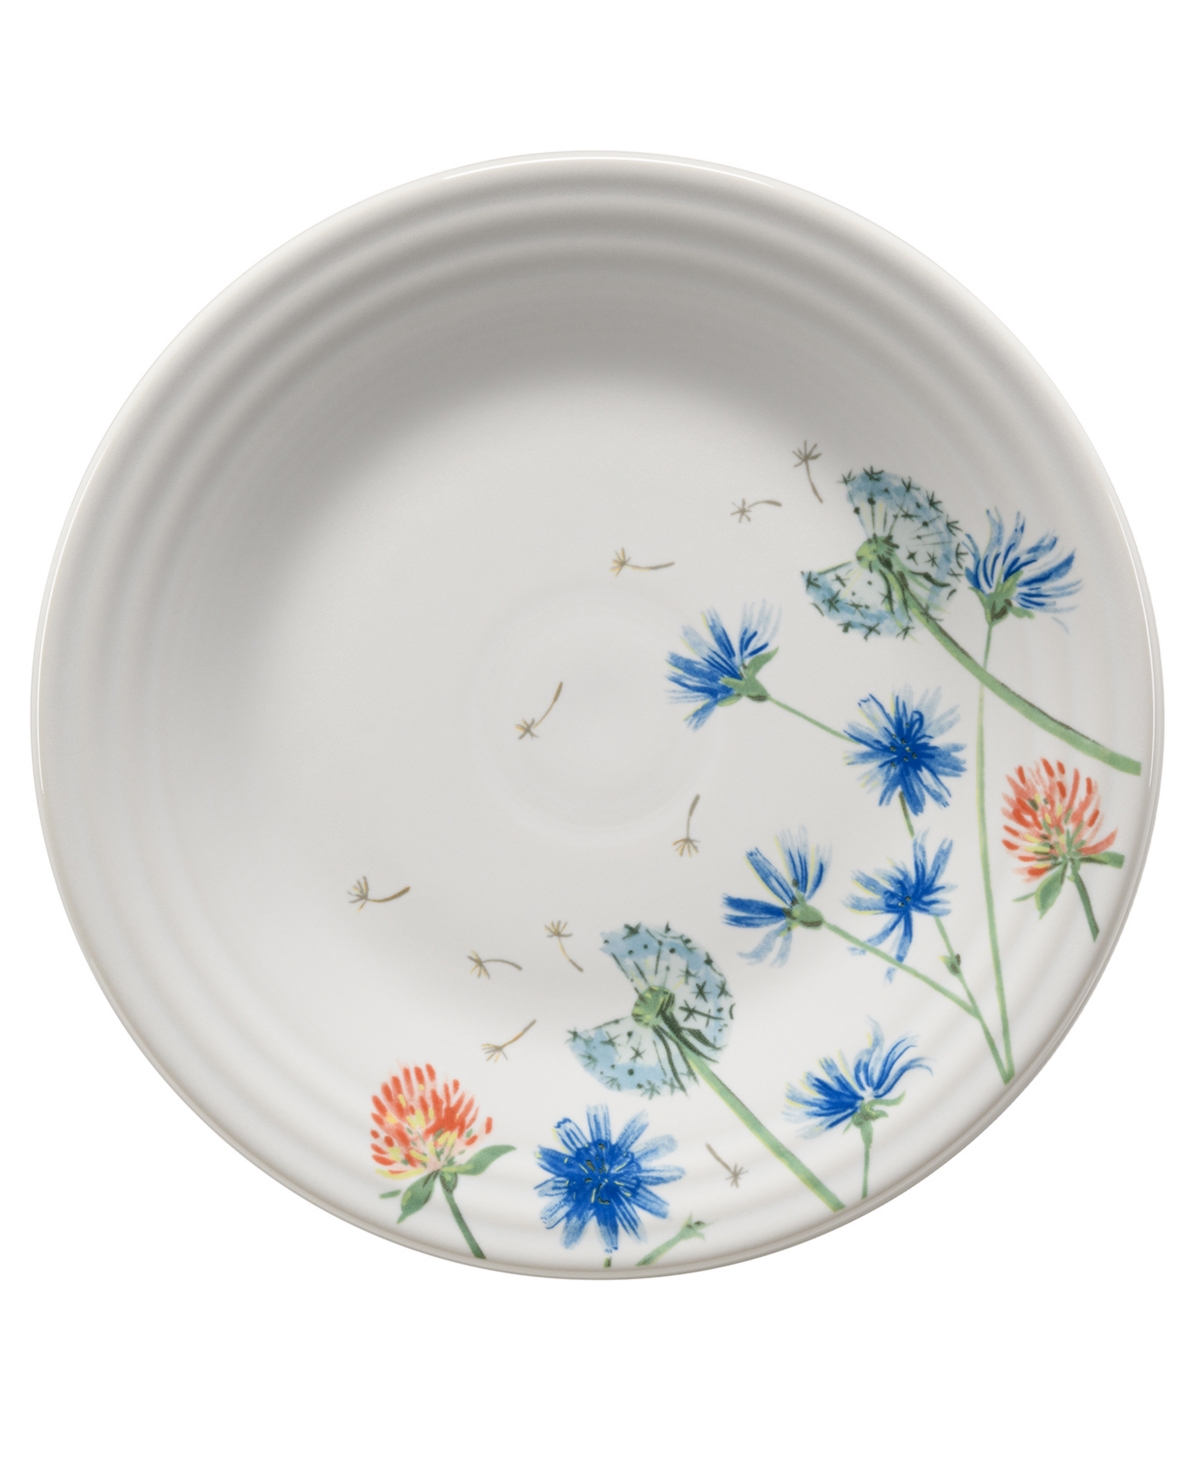 Breezy Floral Luncheon Plate - Multi Color Design With Fiesta Colors